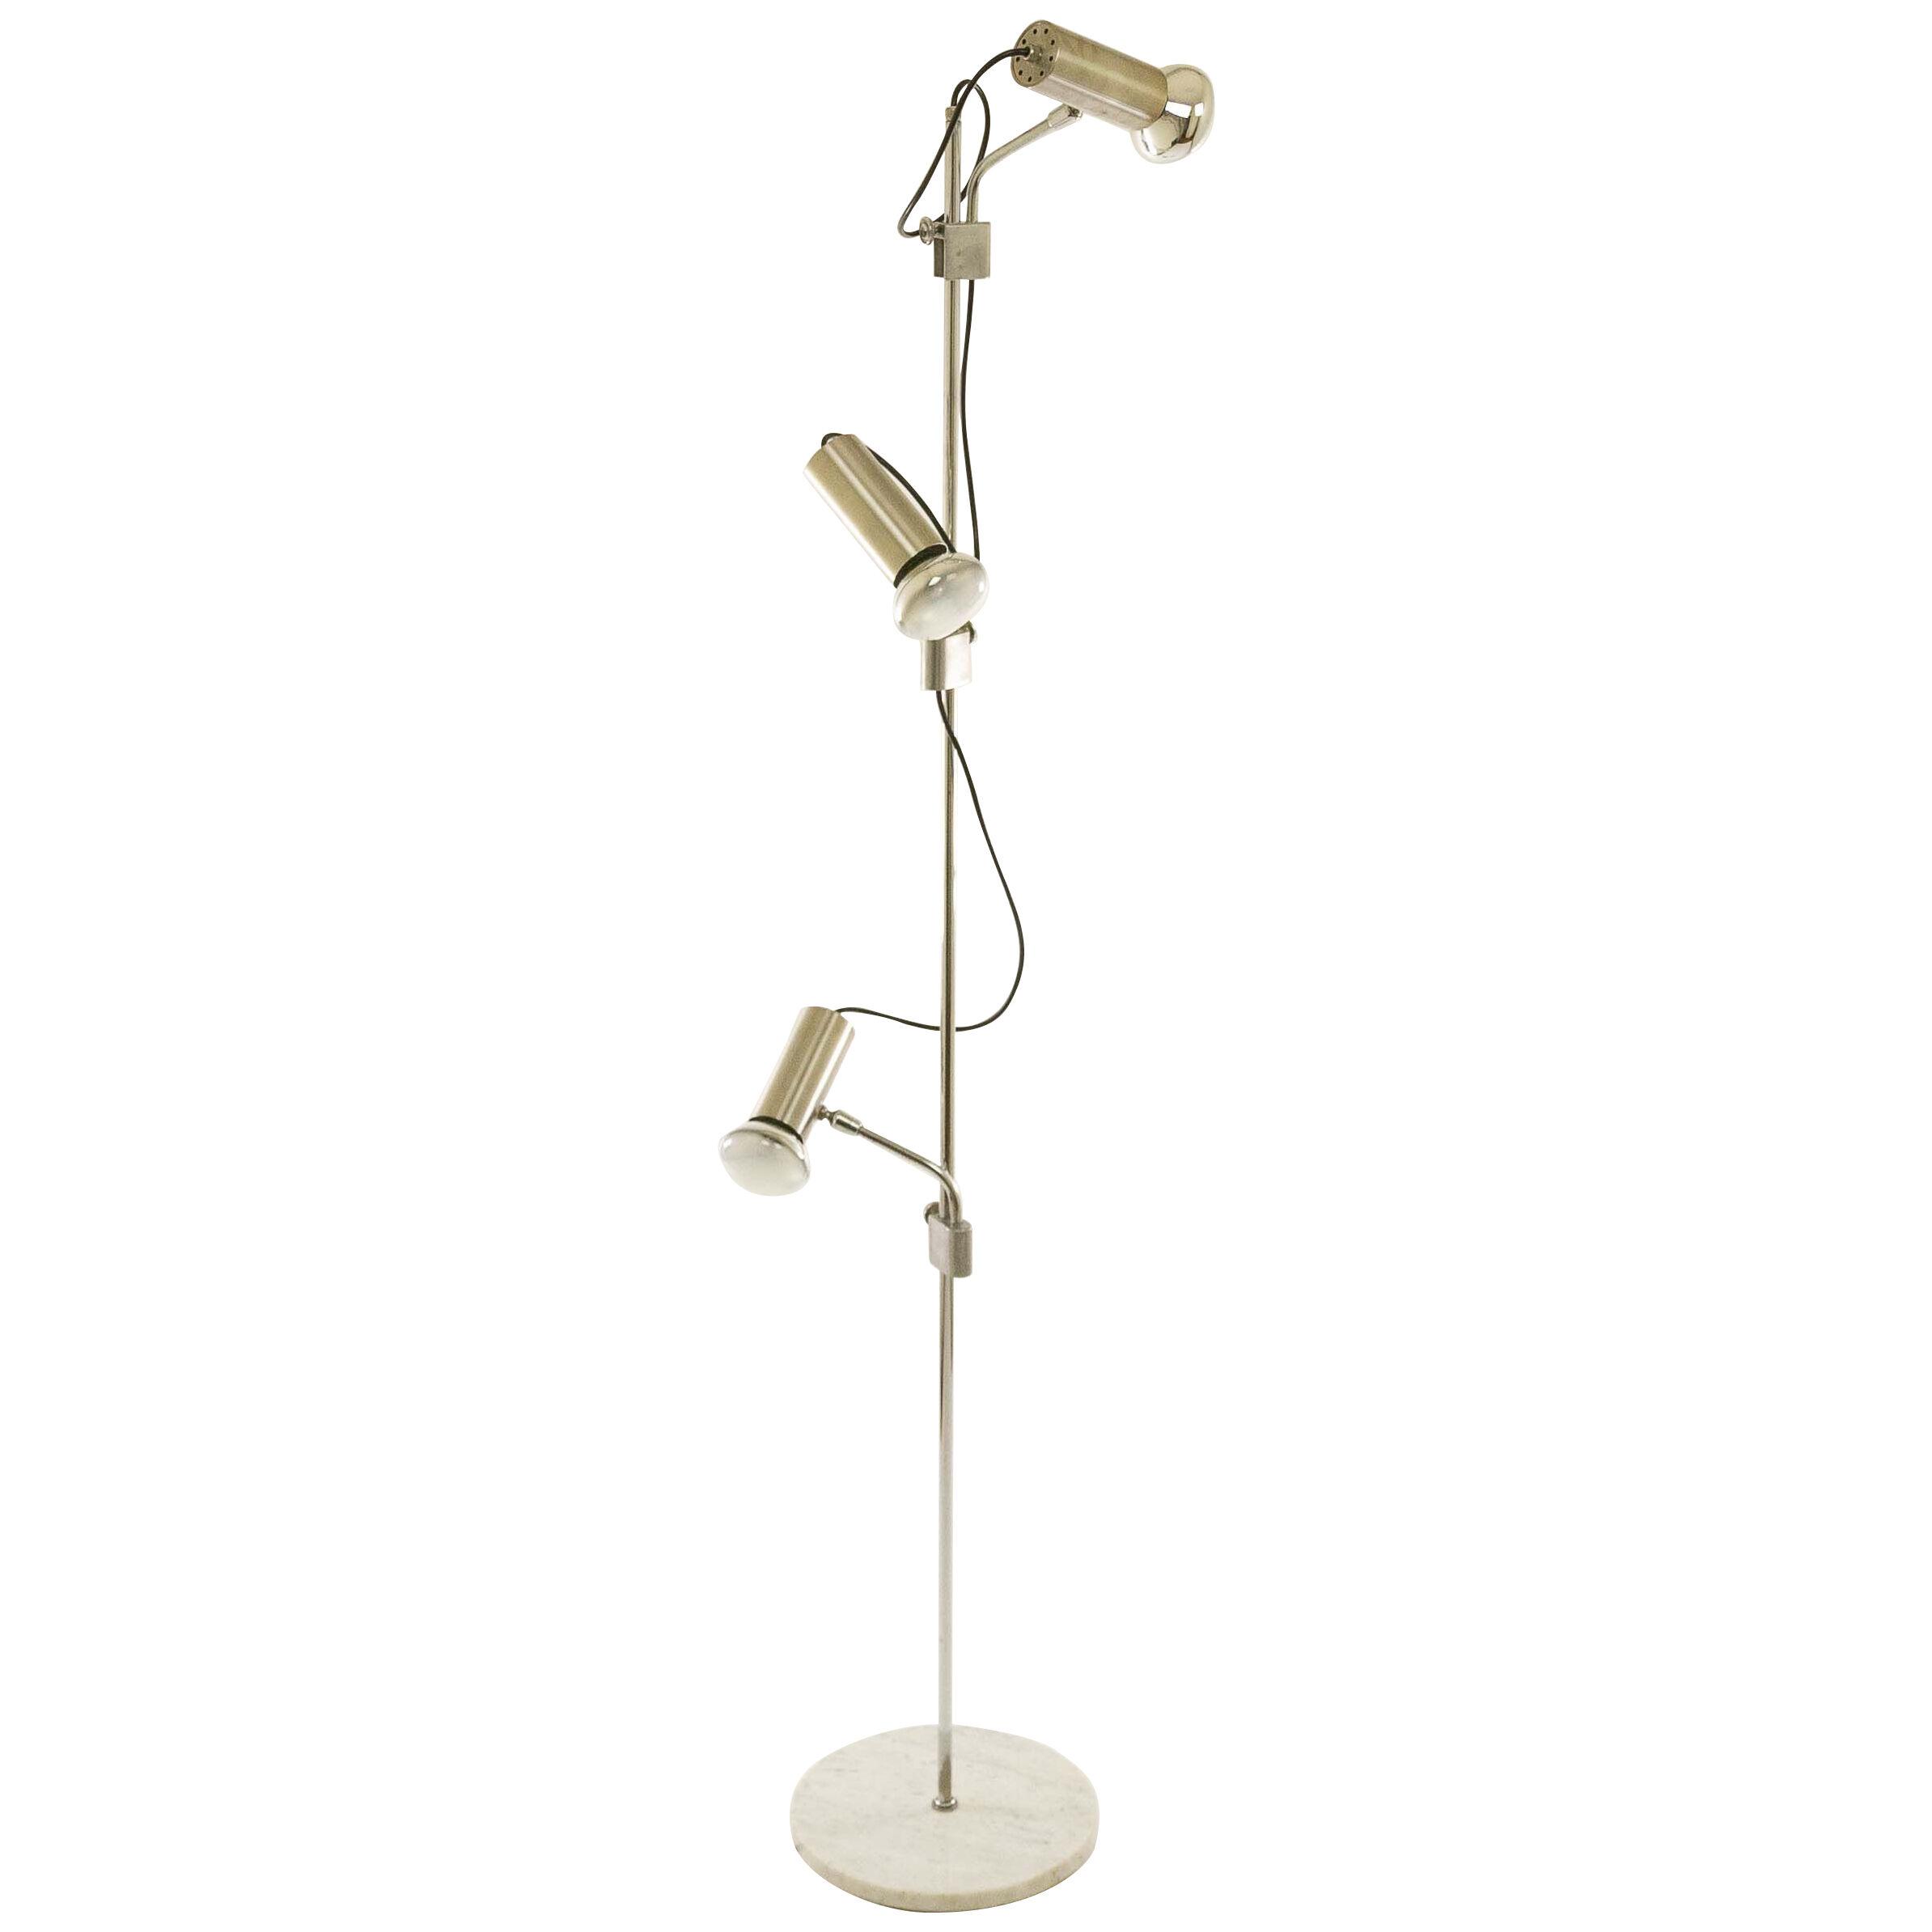 Italian chrome floor lamp with three spots and a marble base, 1970s